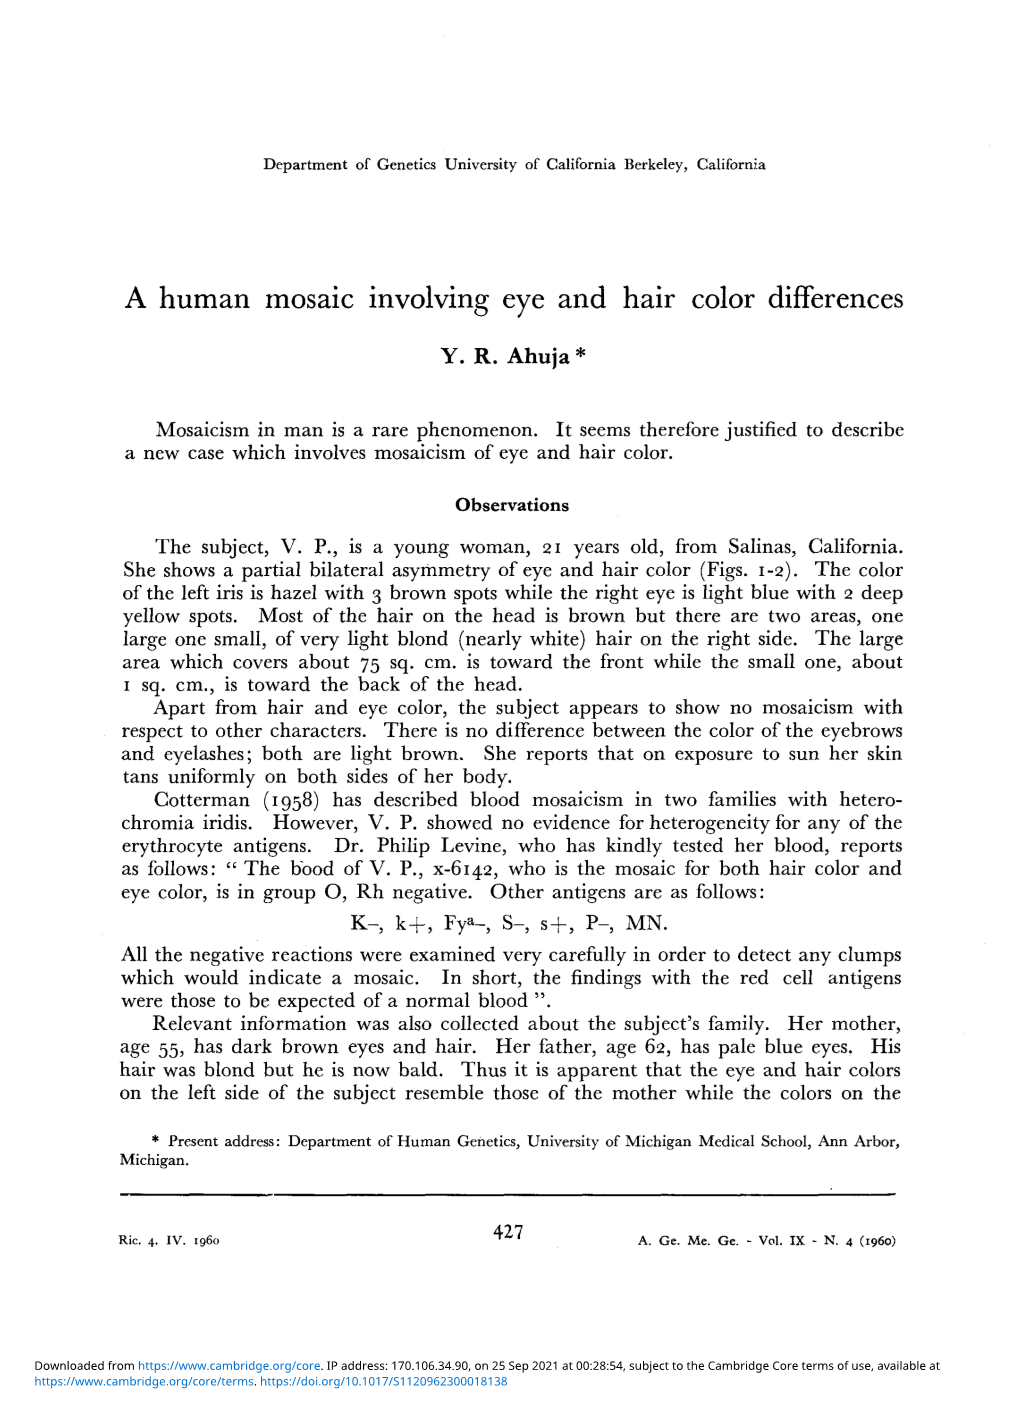 A Human Mosaic Involving Eye and Hair Color Differences